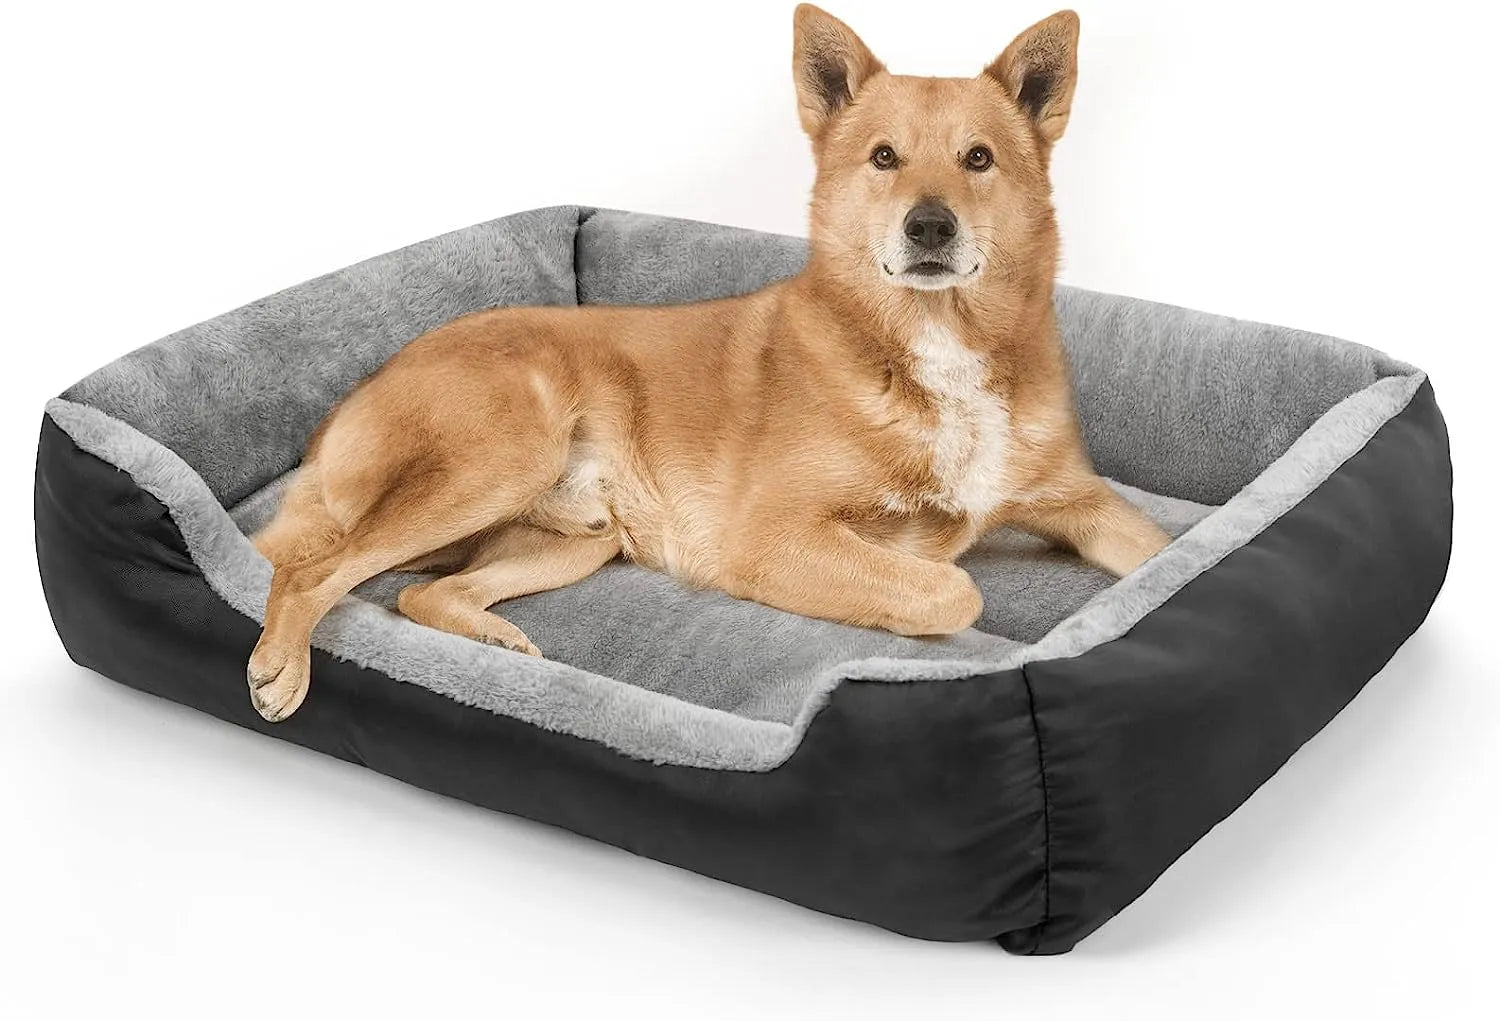 Introducing ATUBAN's large dog beds! Washable and comfortable, these rectangular mattresses provide warmth for medium to large dogs and cats.